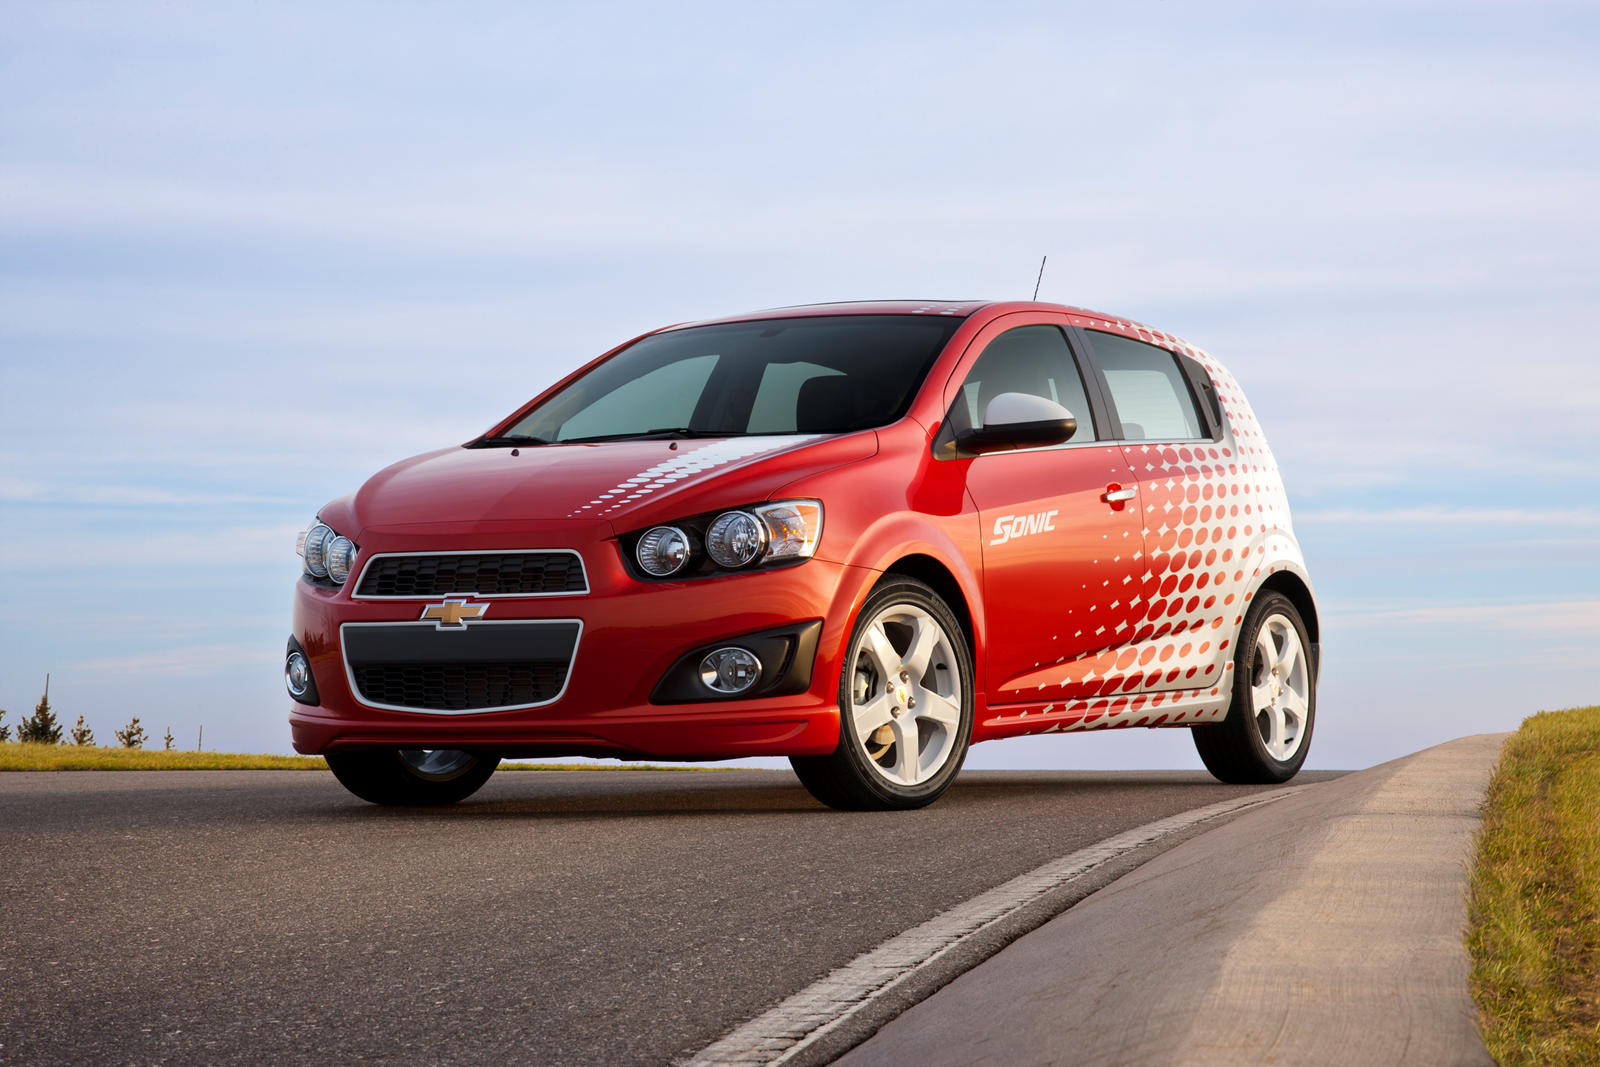 2016 Chevrolet Sonic Hatchback Front Angle View